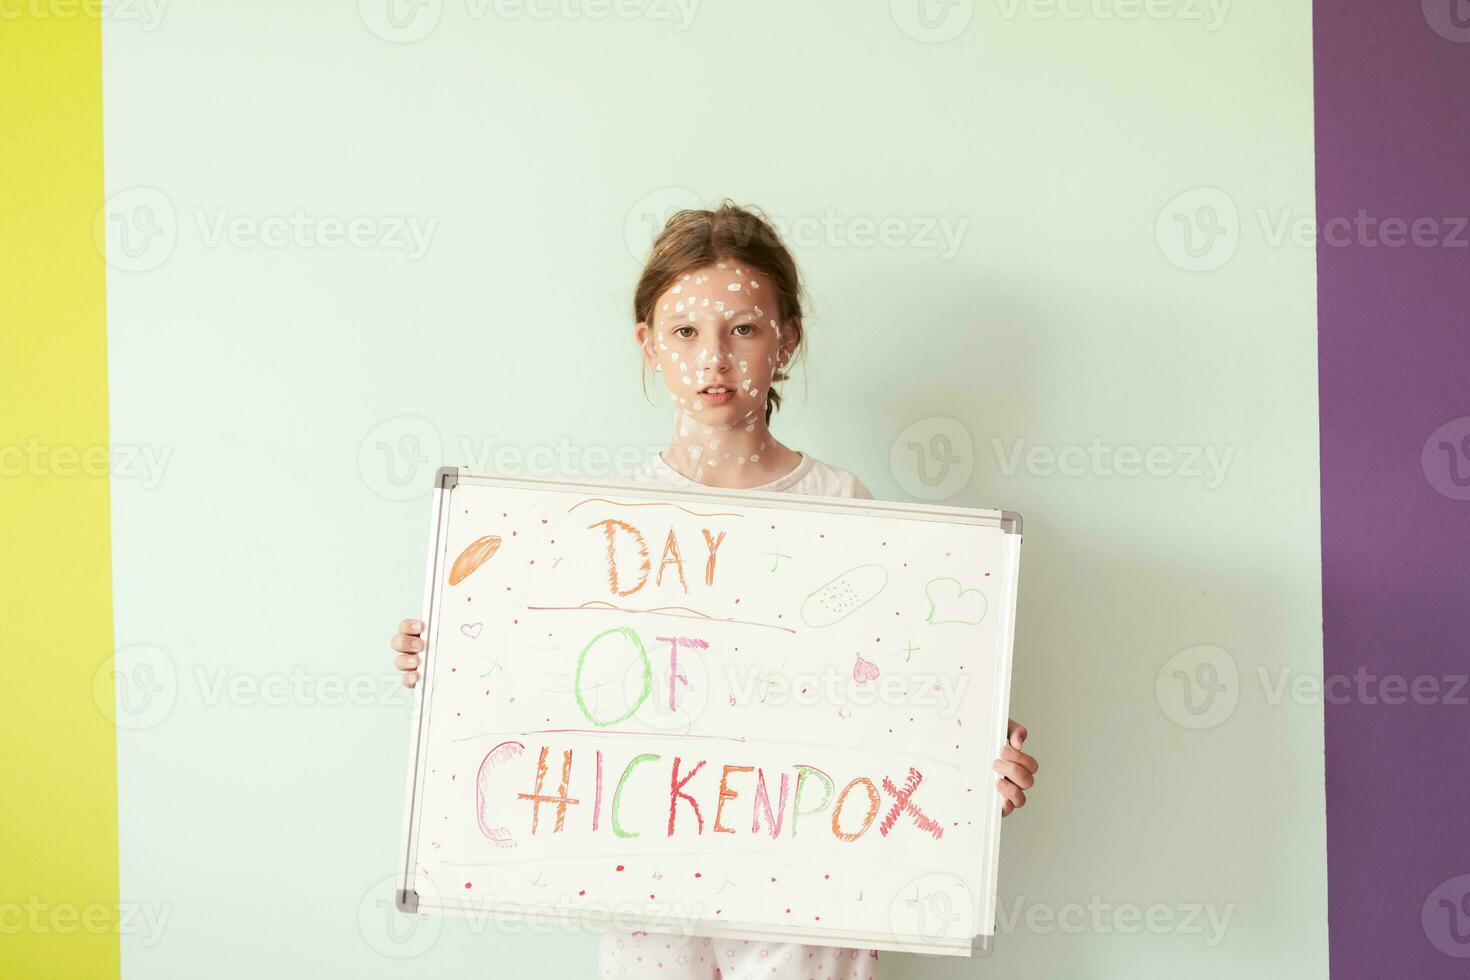 A little schoolgirl with chickenpox draws a message on the whiteboard in the kids' room, and antiseptic cream is applied to the face and body. Chalkboard background. photo